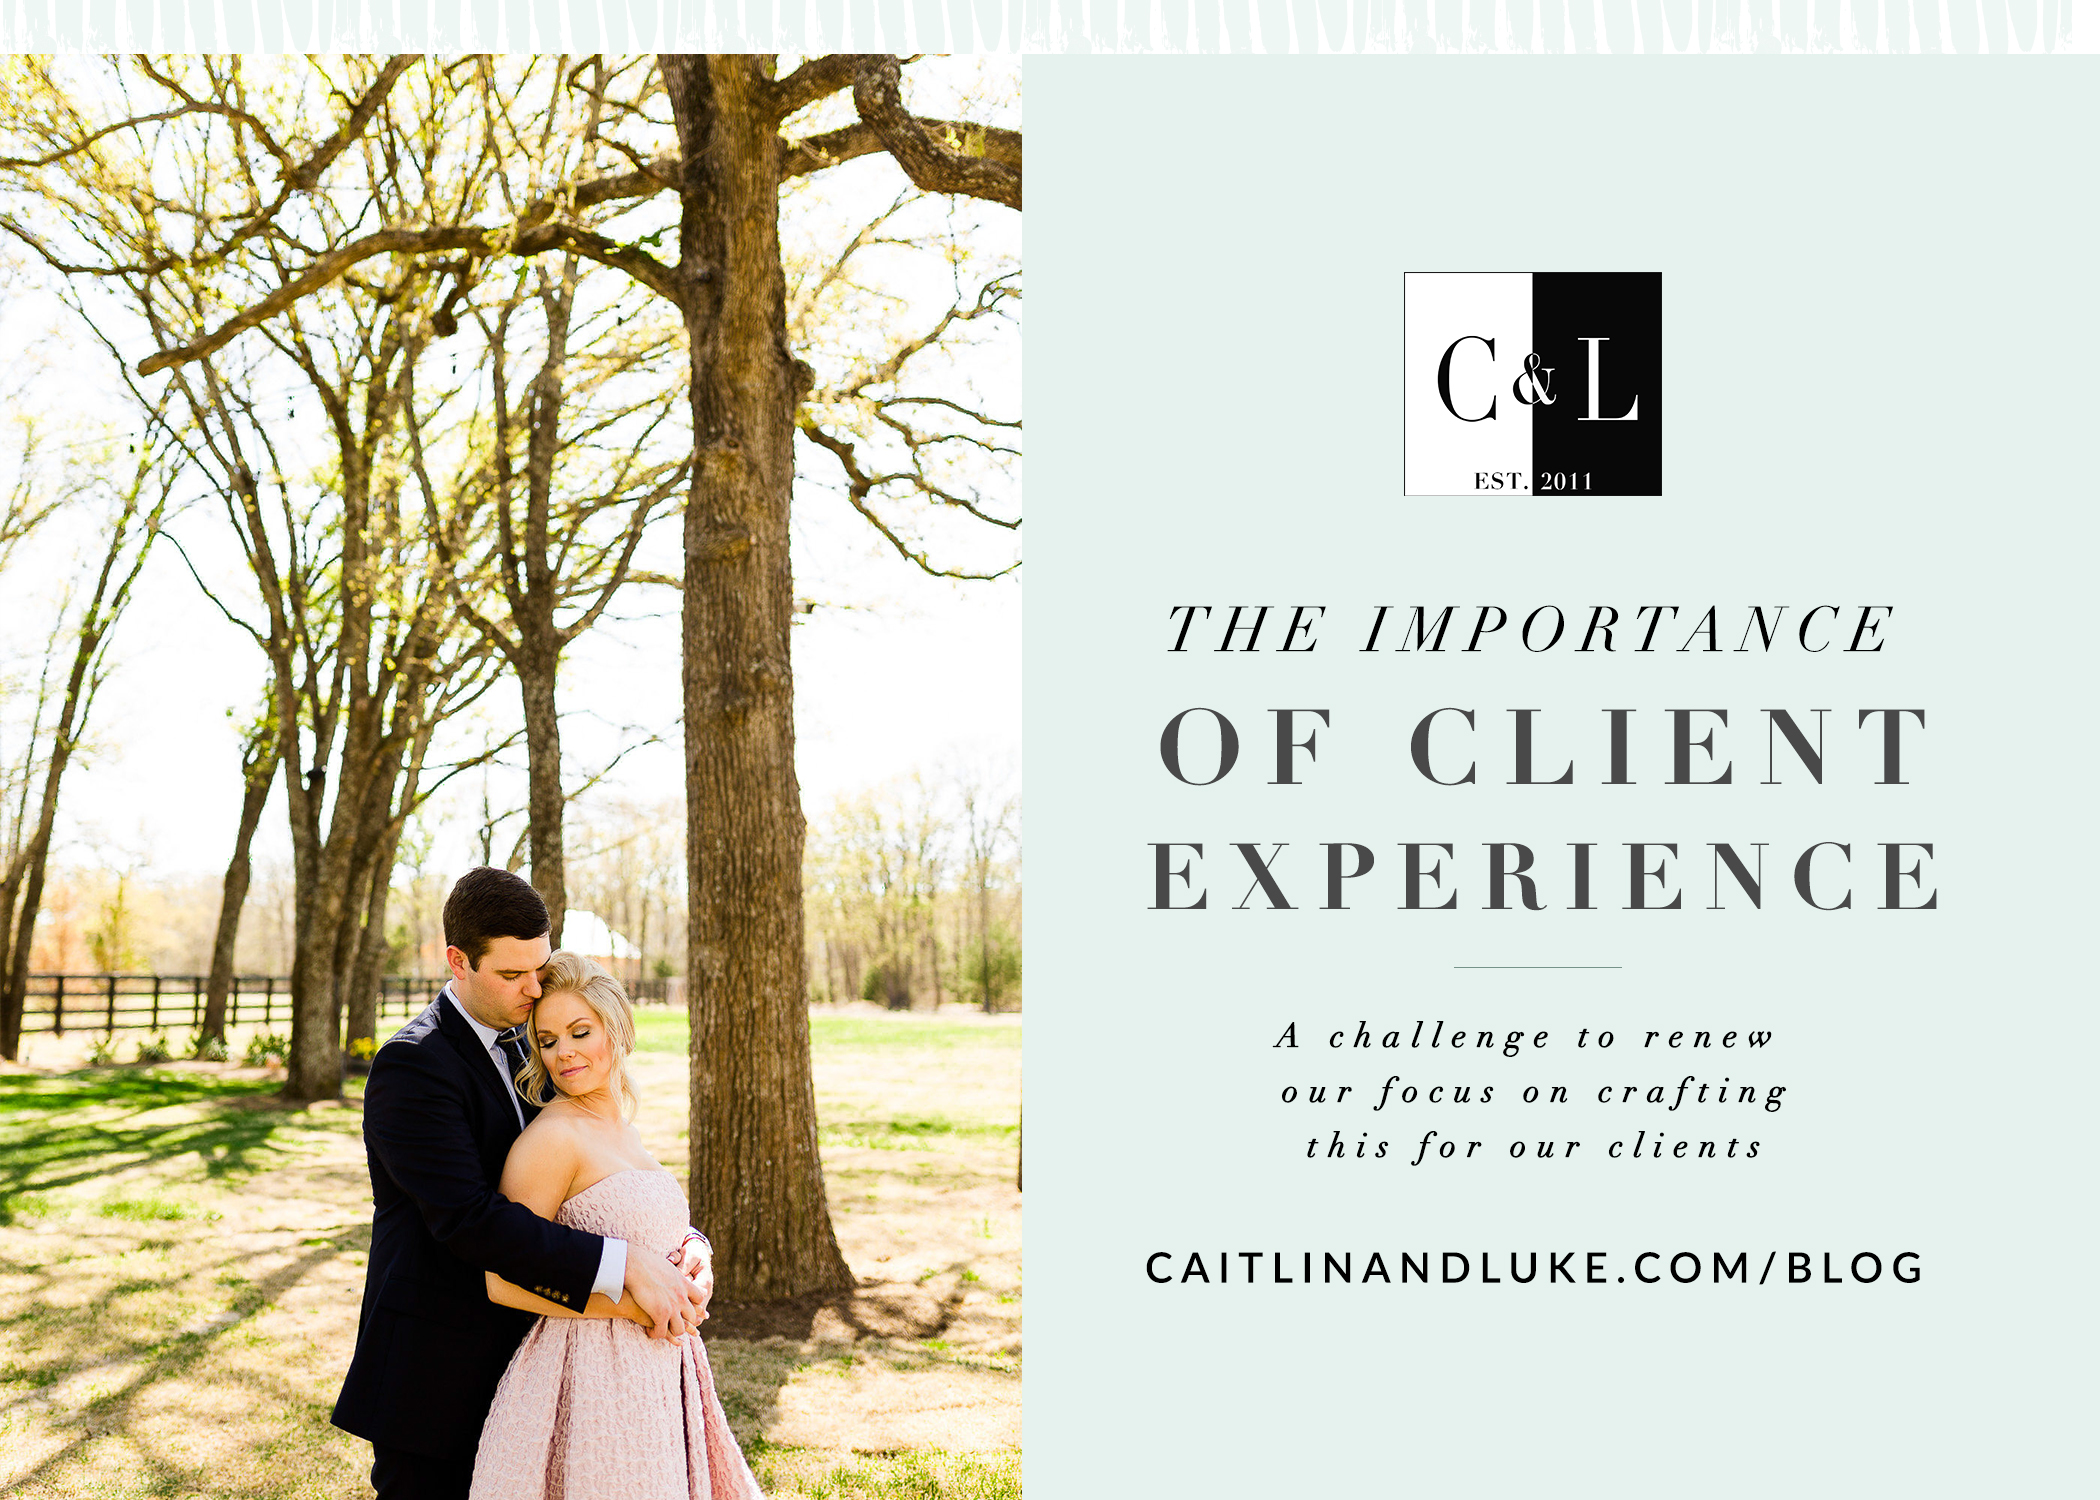 The Importance of Client Experience